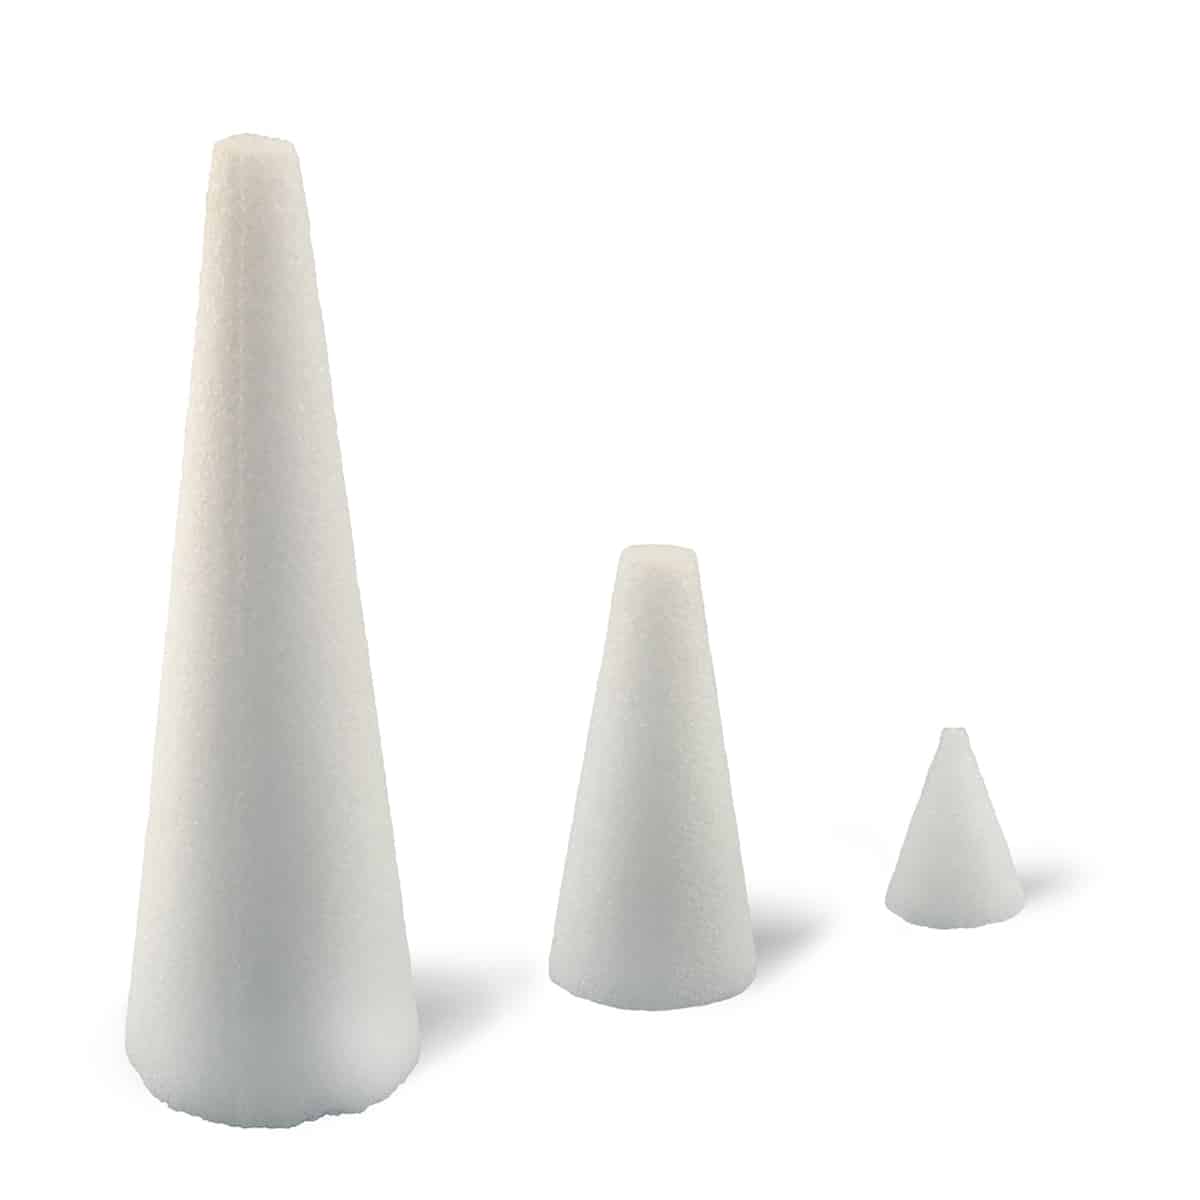 3 Inch White Cones for Floral Arrangements and Projects 12 Pack Hygloss Products Styrofoam Cones 